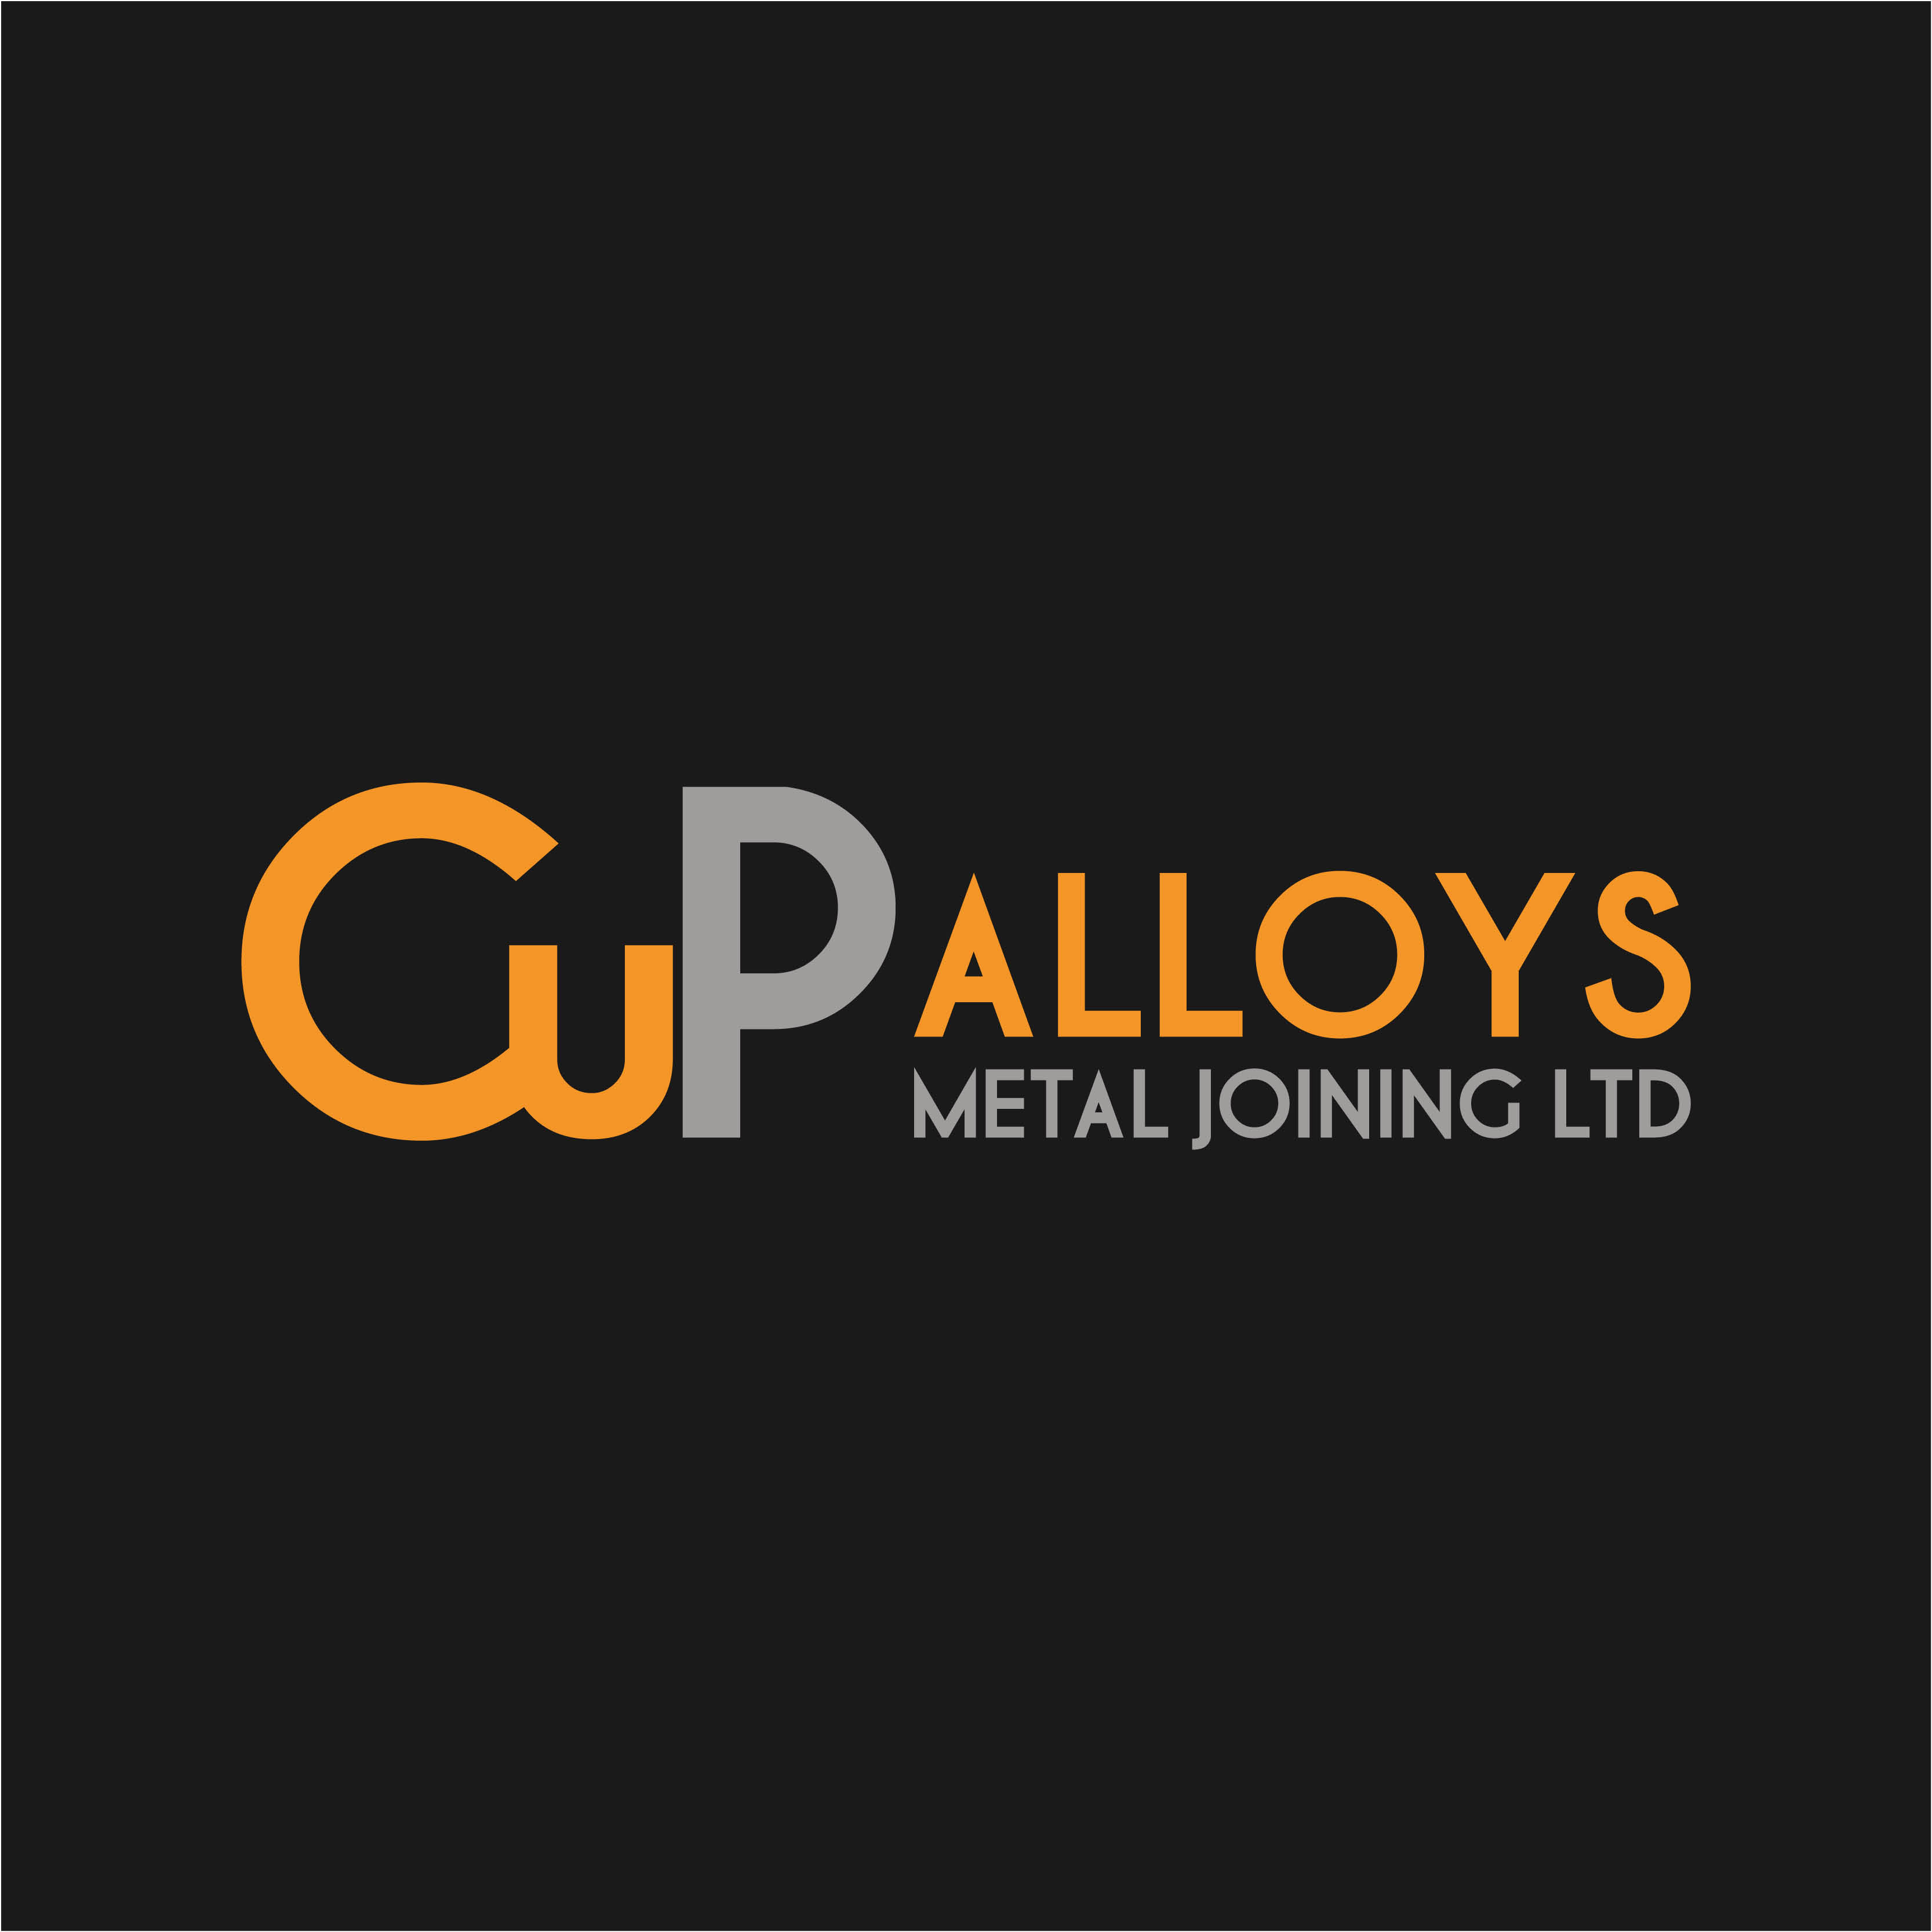 CuP Alloys (Metal Joining) Ltd